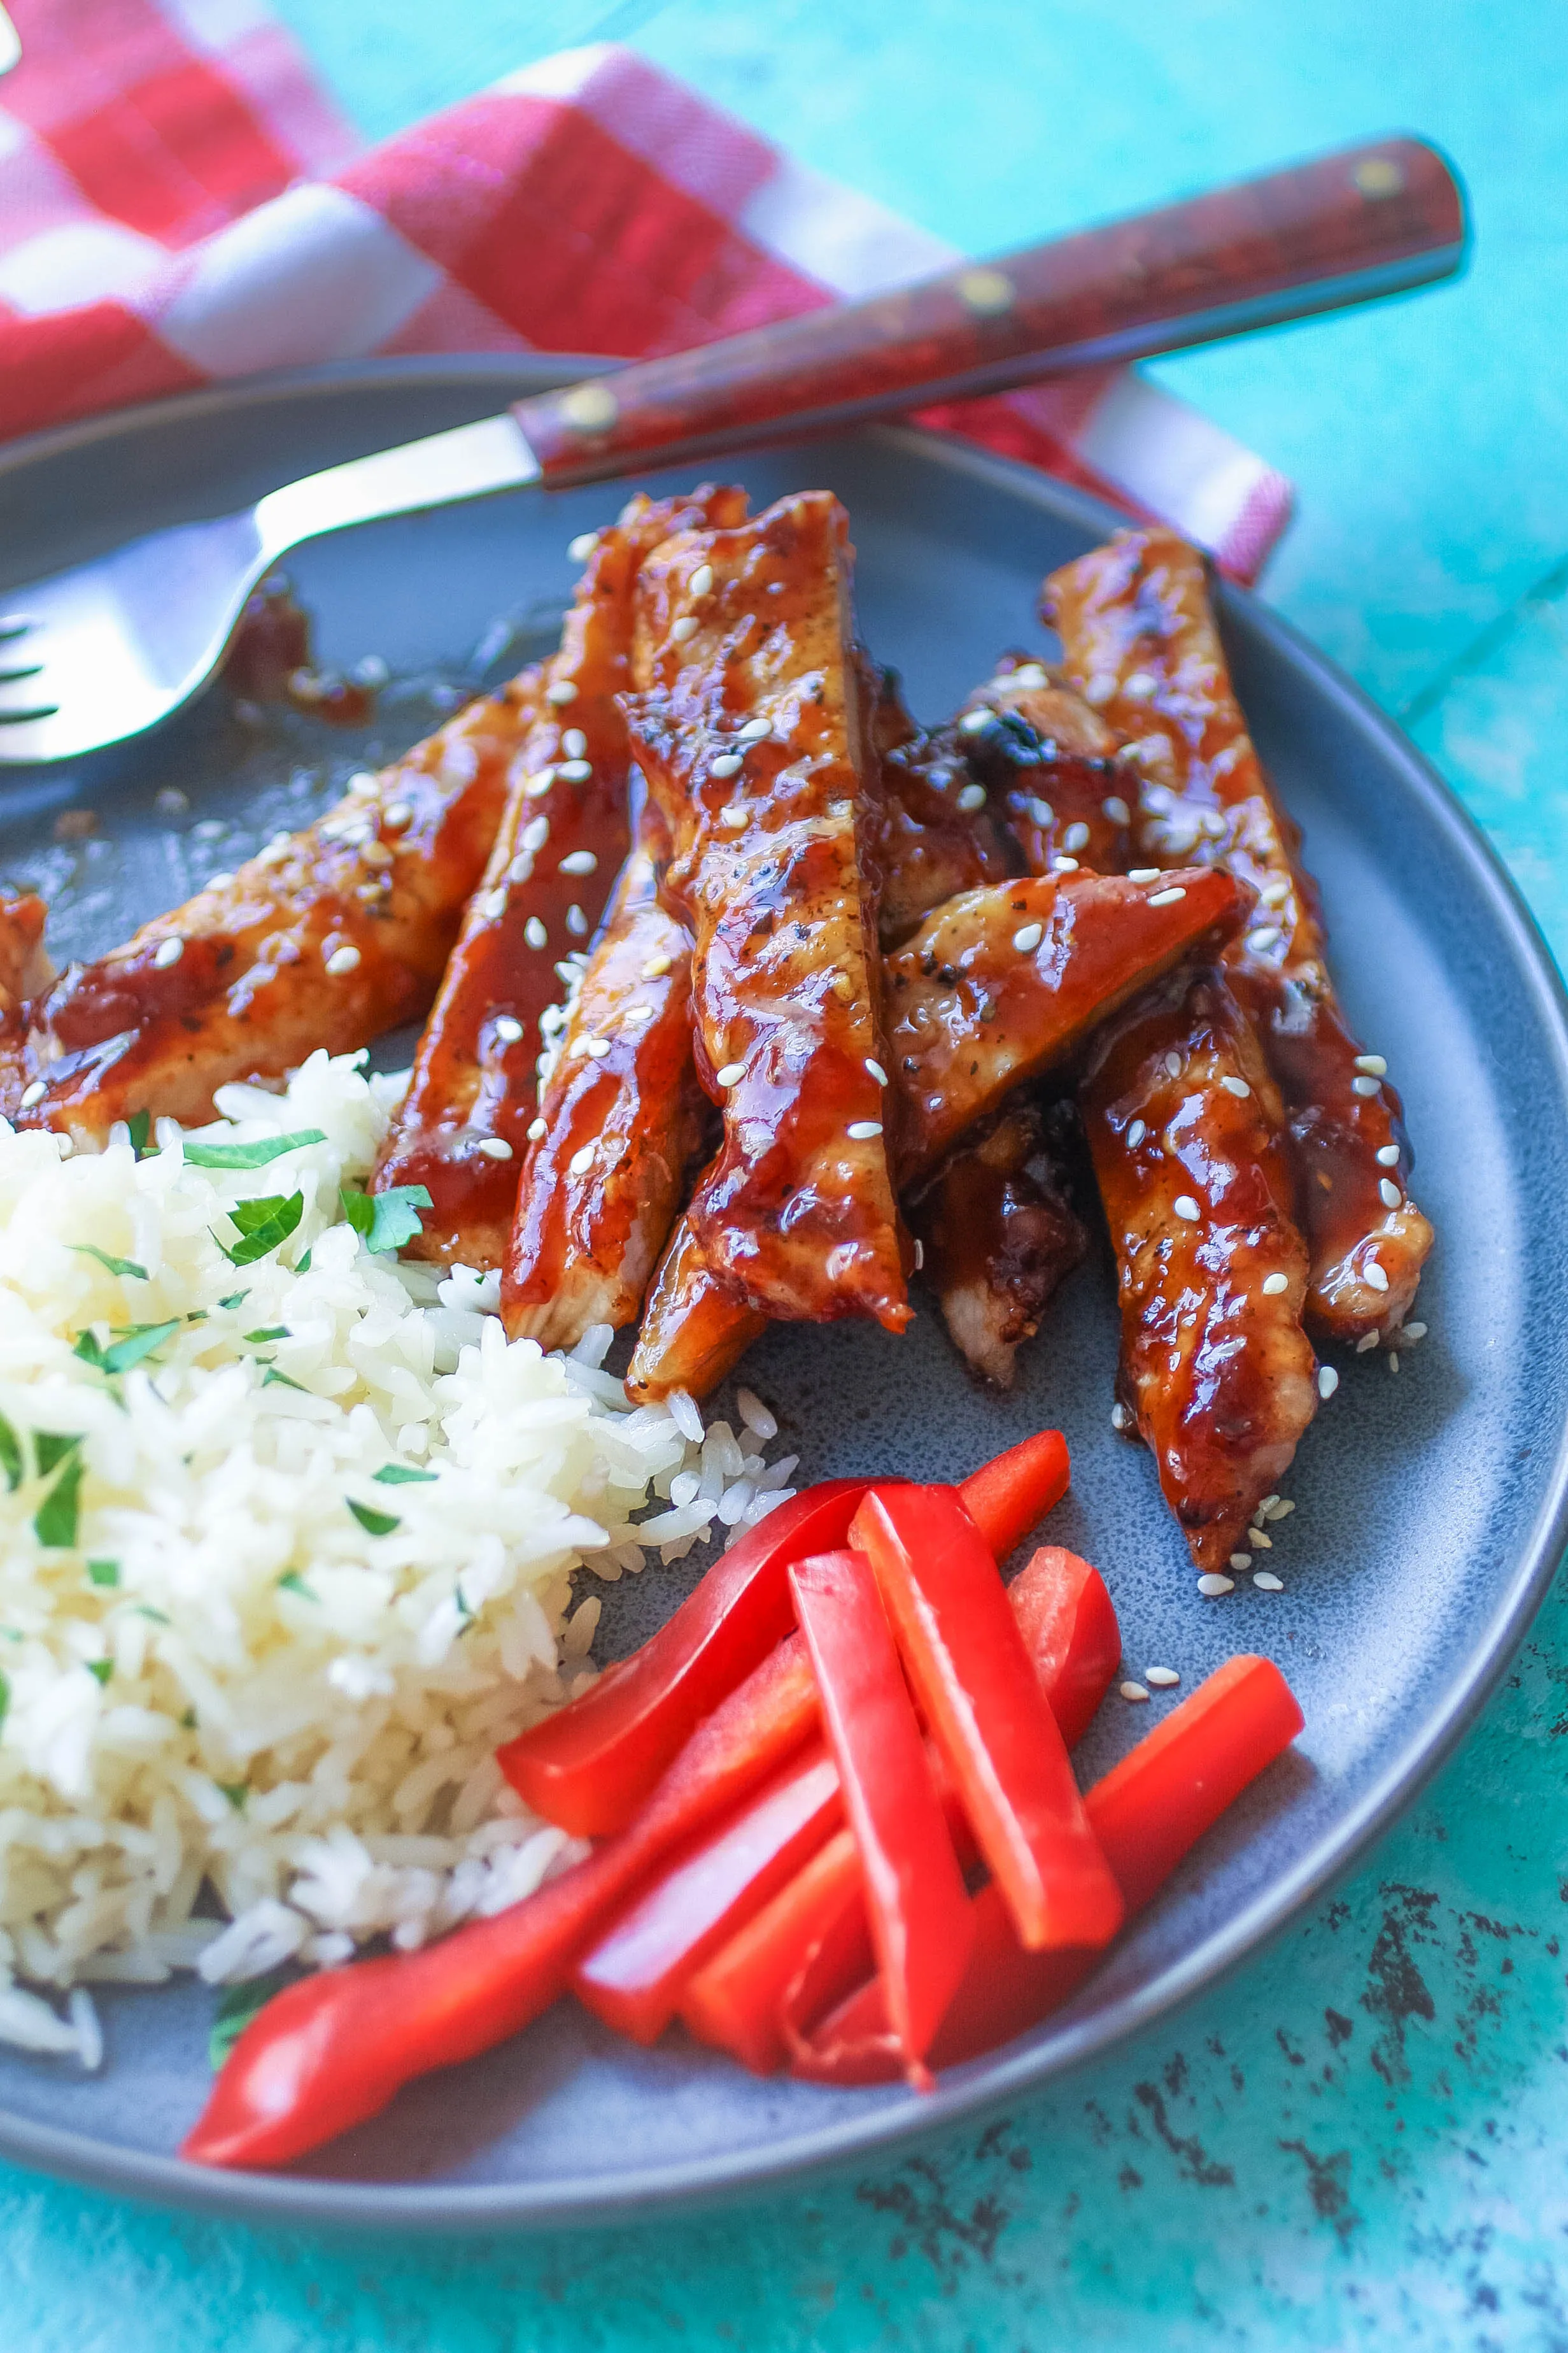 Grilled Pork with Korean-Style BBQ Sauce is a delight for a main dish meal. Grilled Pork with Korean-Style BBQ Sauce is so easy to make, and it's delicious, too!